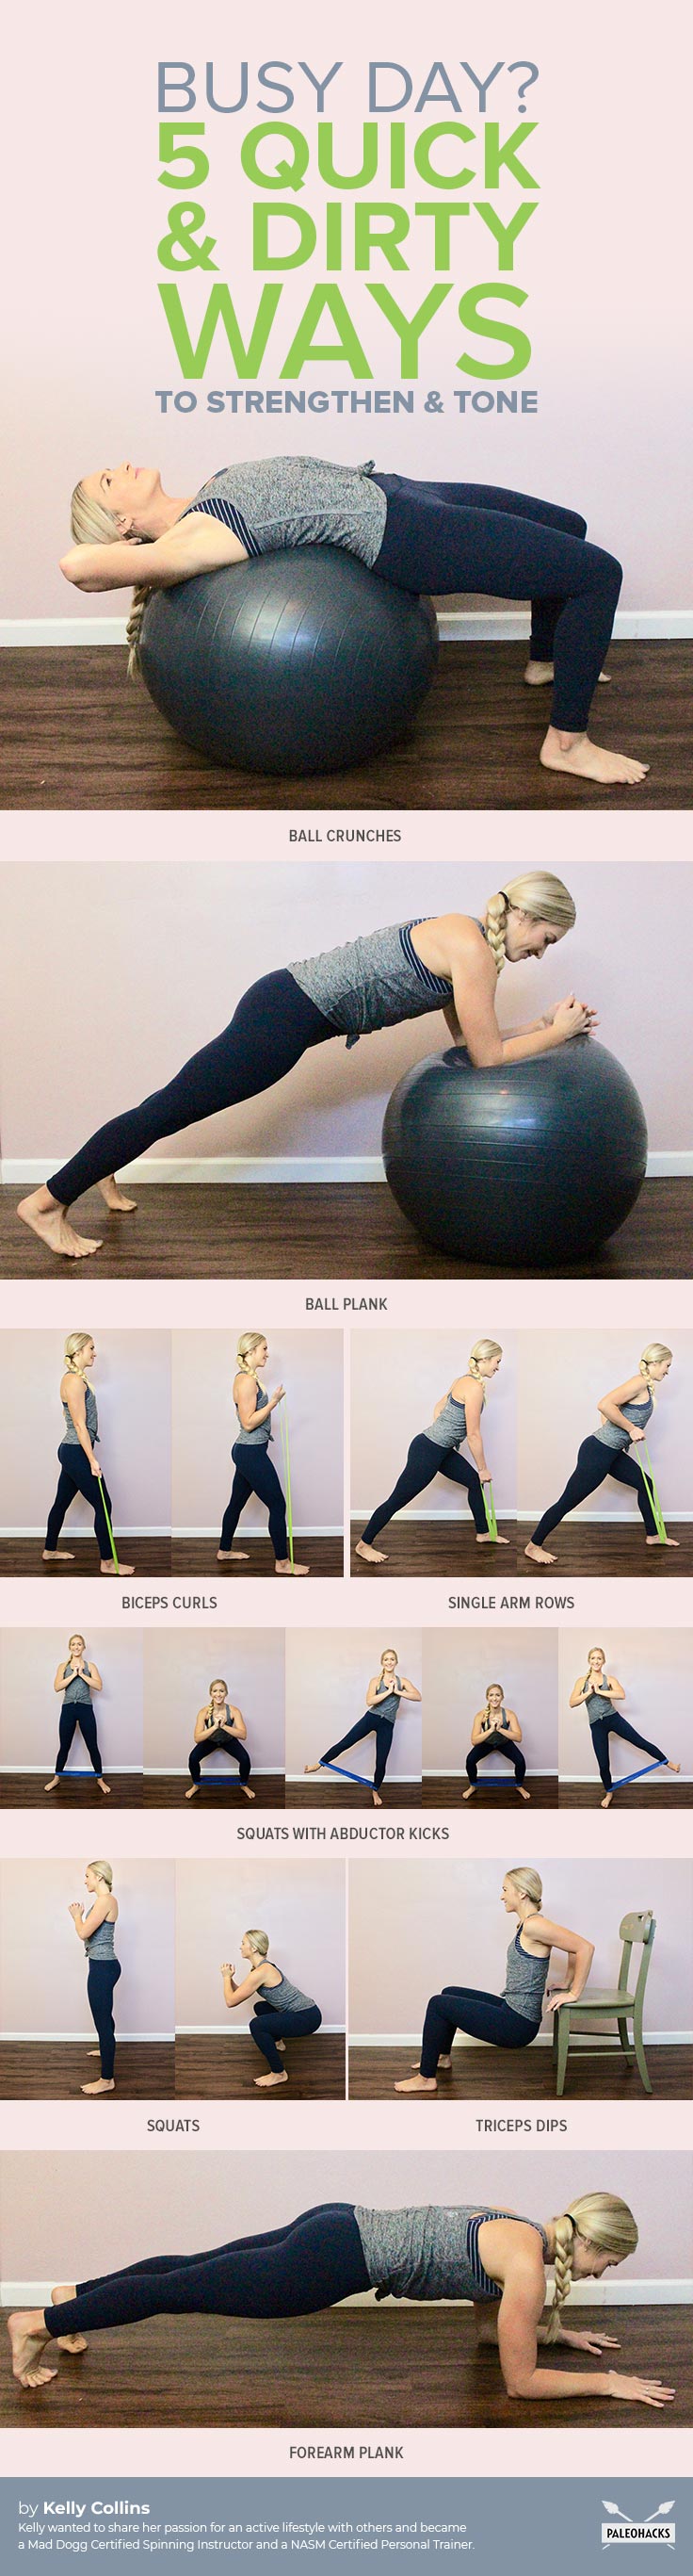 Sneak these quick and easy exercises into your day to strengthen and tone on the sly.